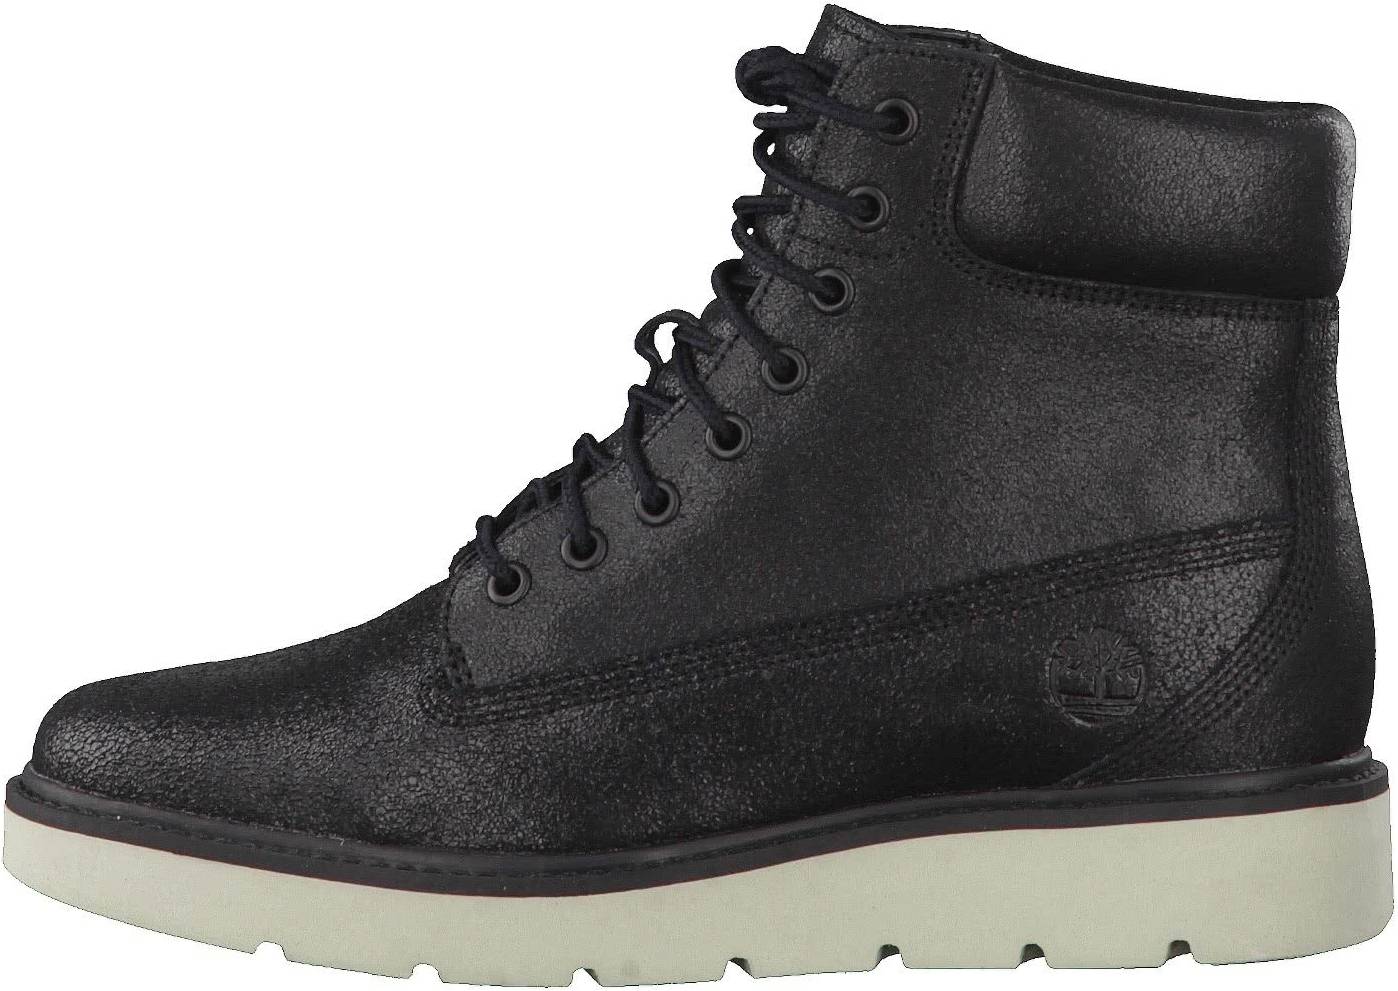 krekel kunstmest Opschudding Timberland Kenniston 6-inch Sneaker Boots Review, Facts, Comparison |  RunRepeat